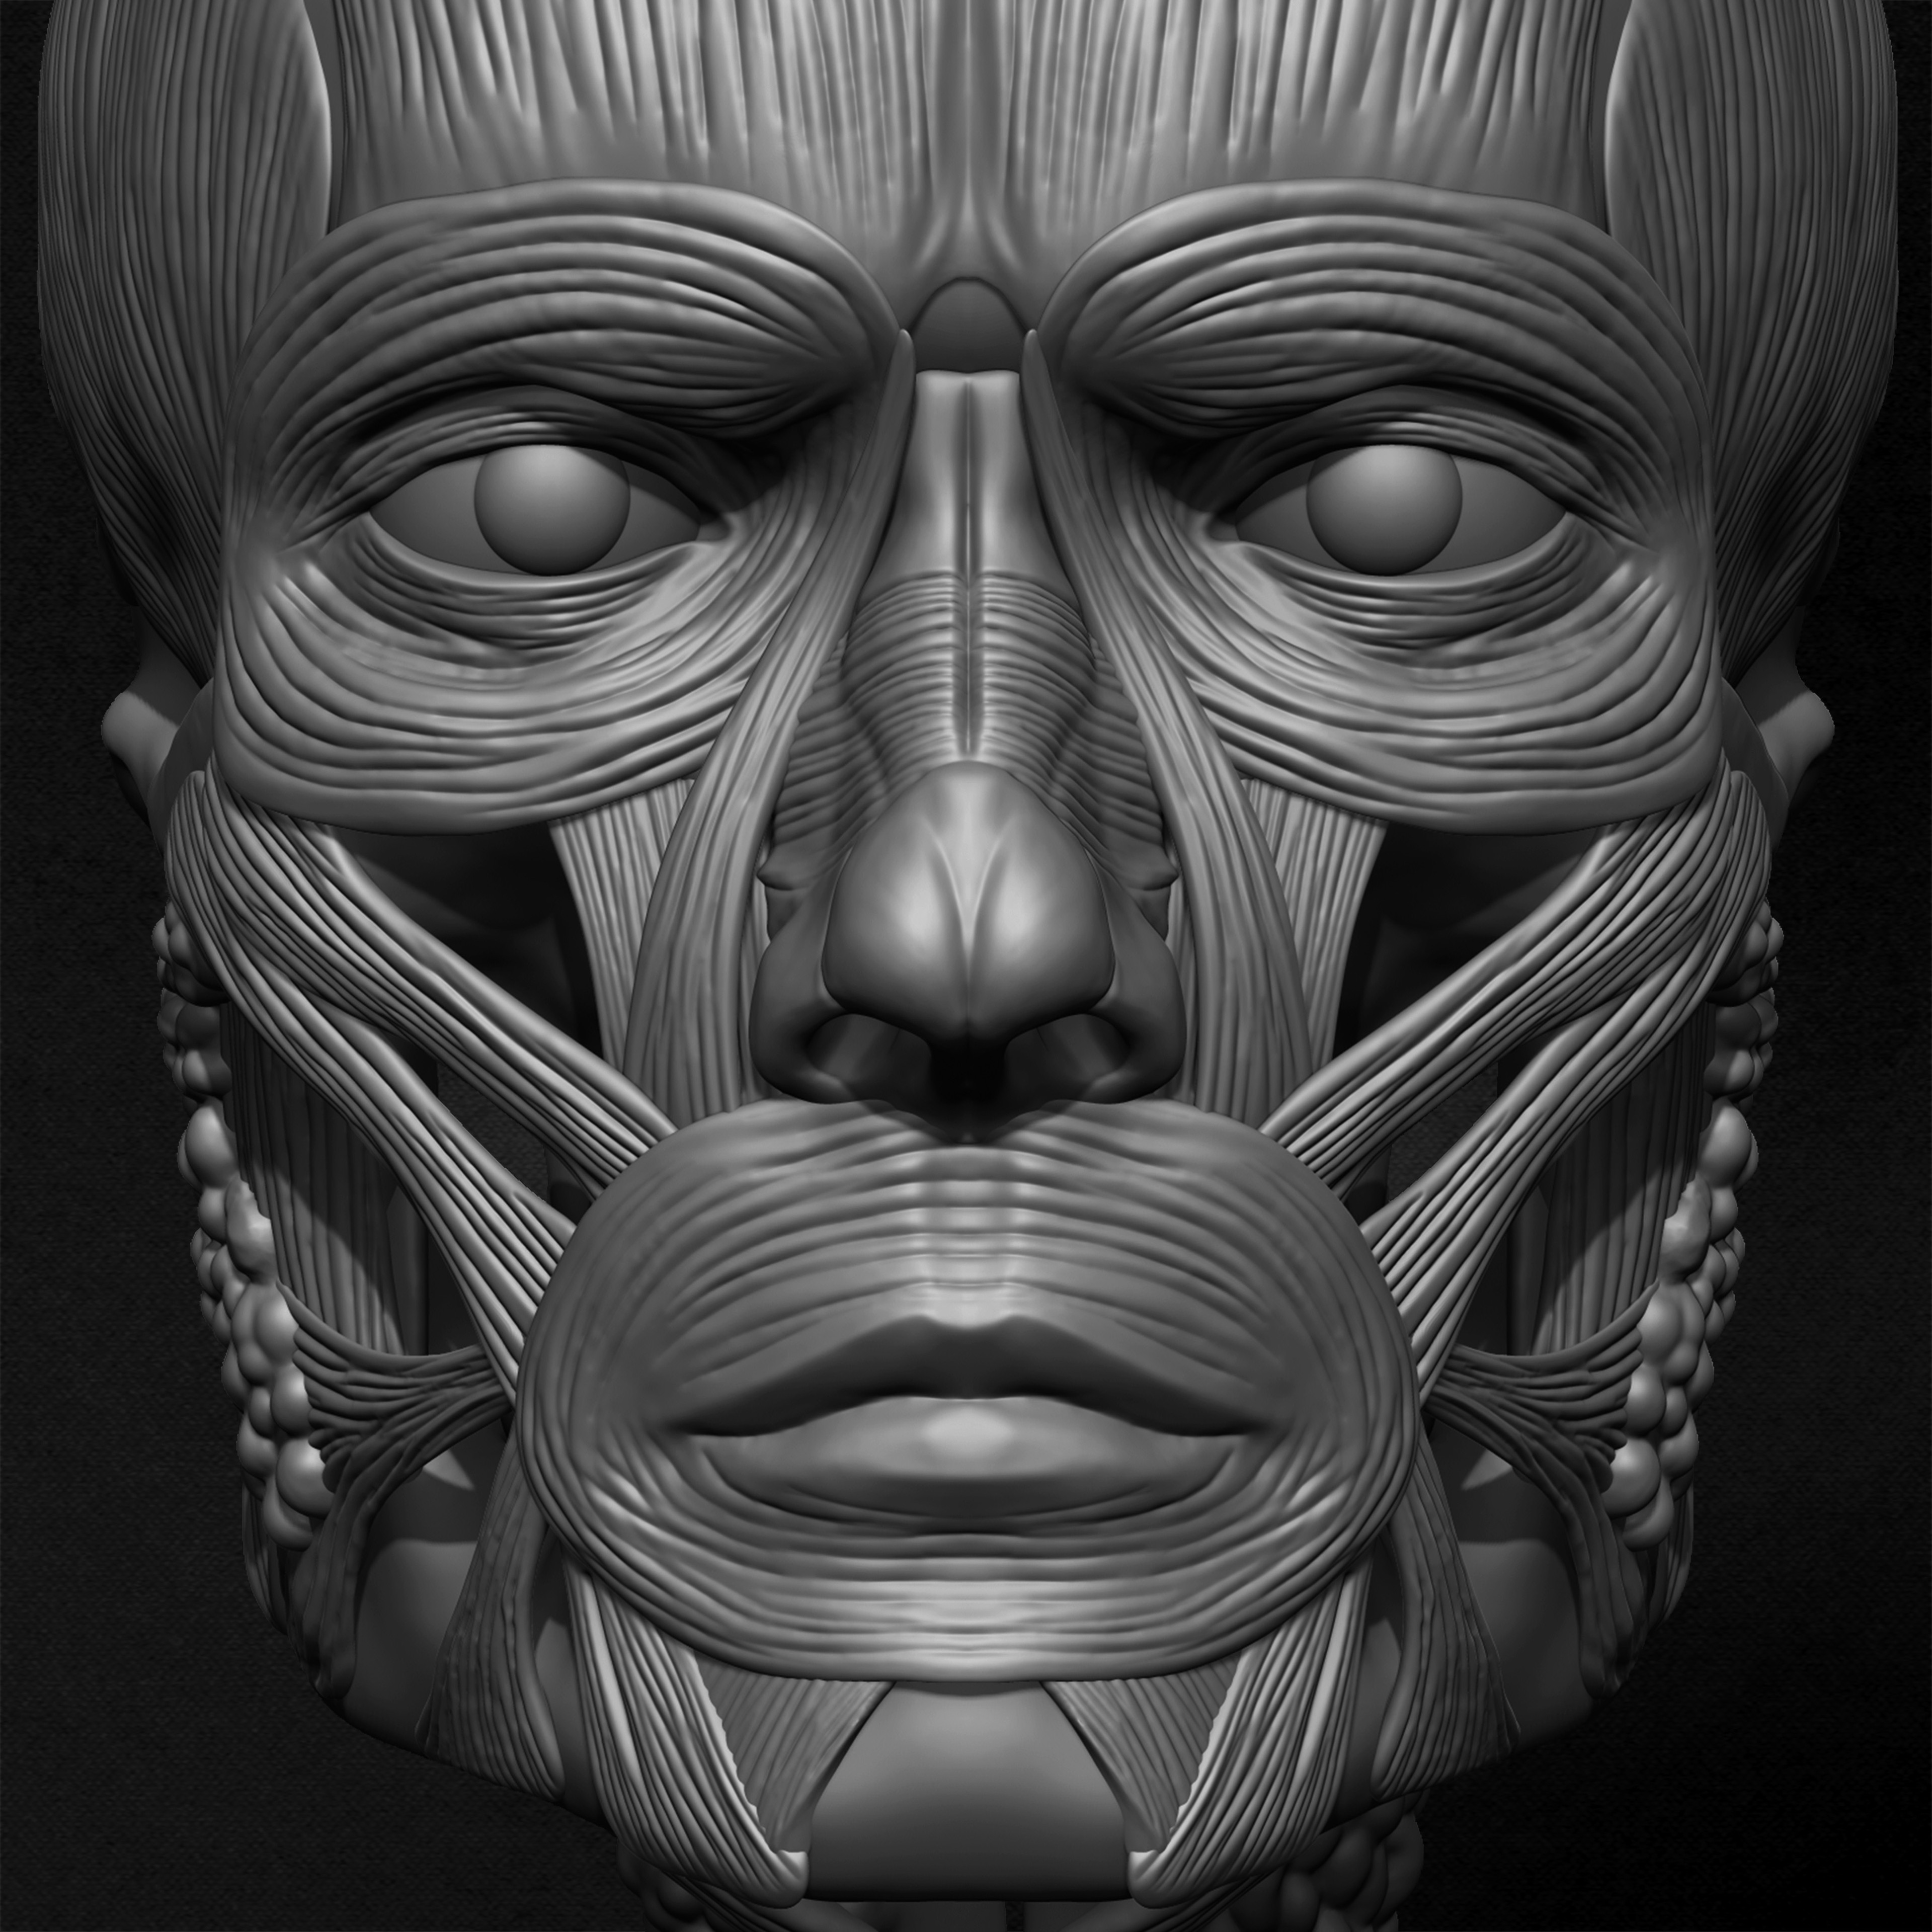 Male Facial Ecorche Human Anatomy sculpted by Yacine BRINIS 021